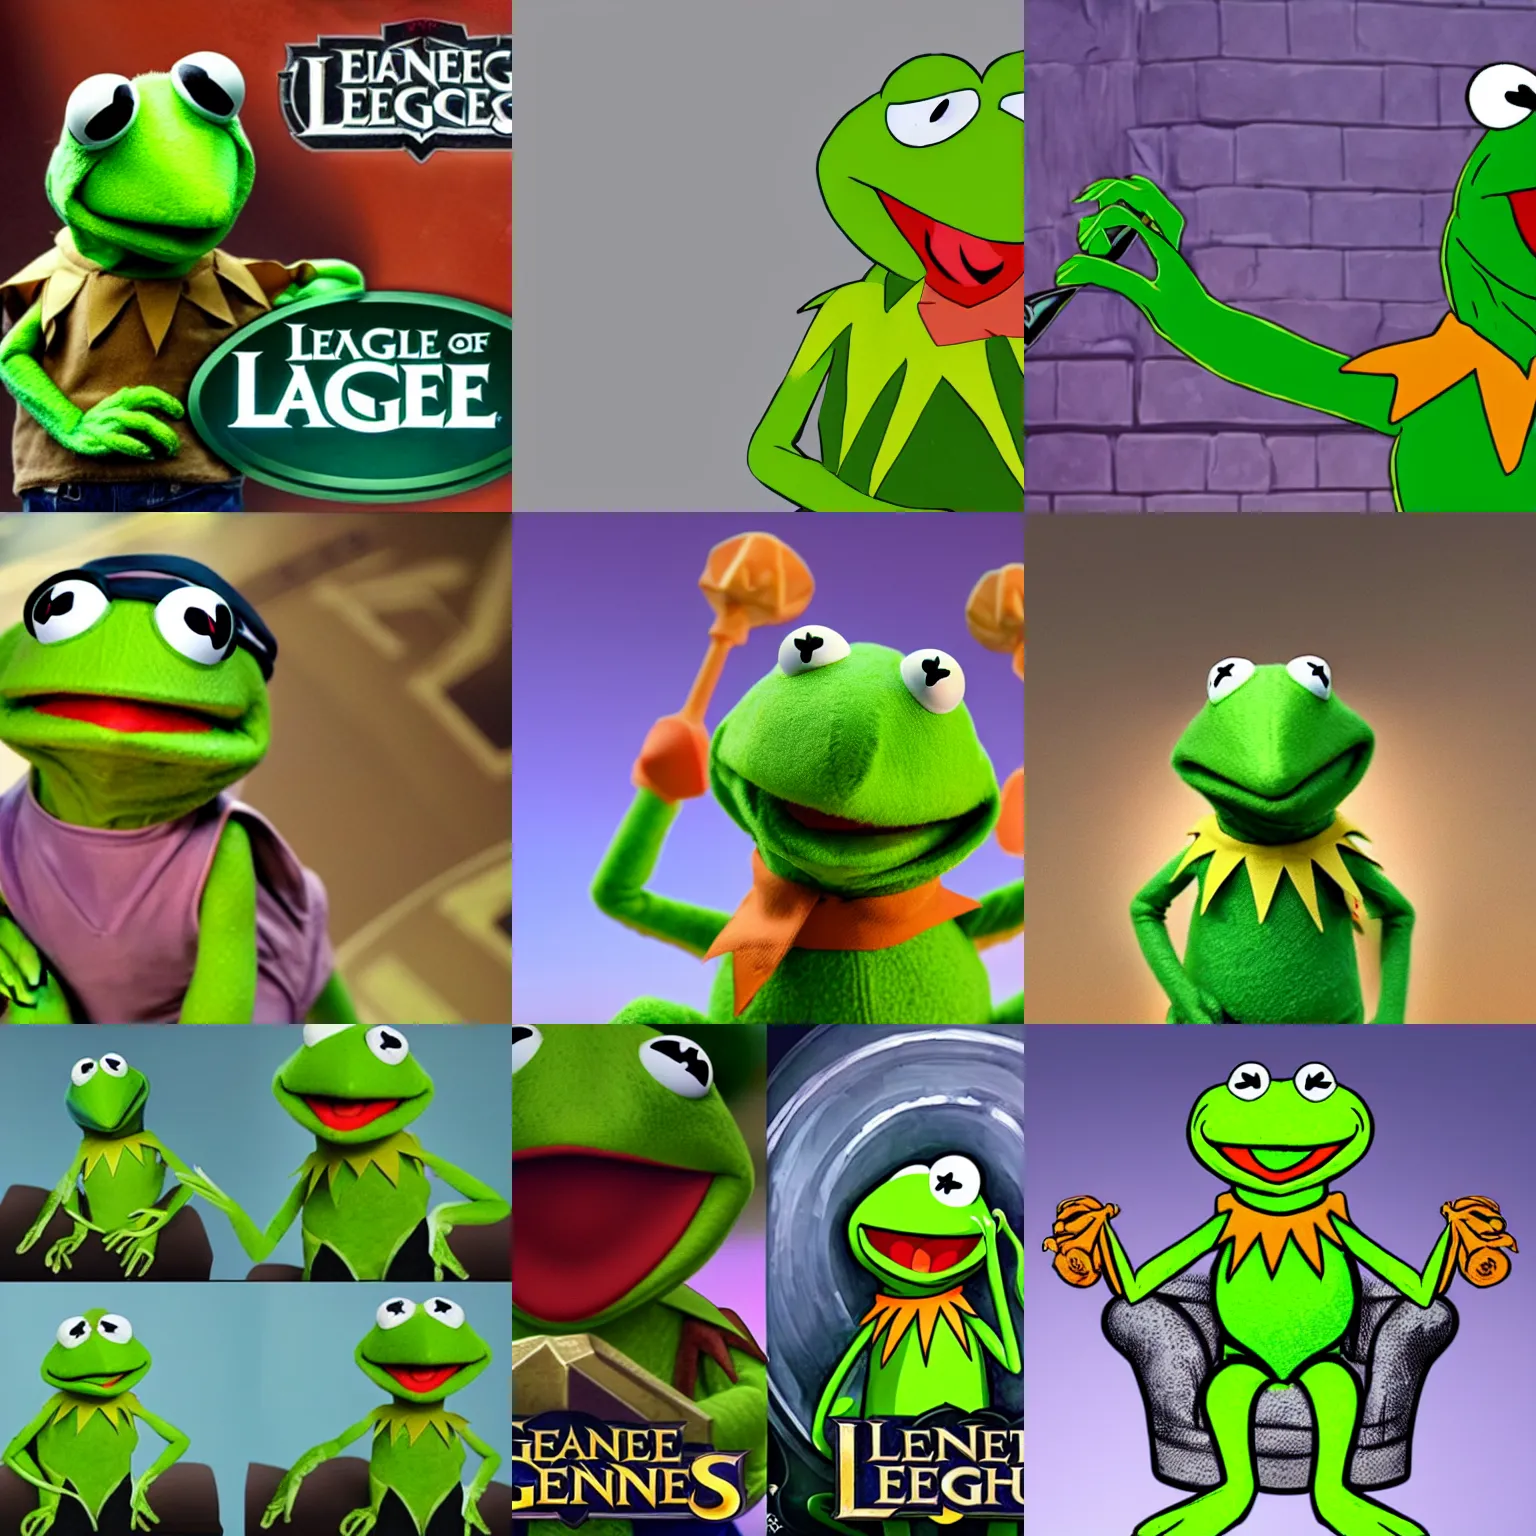 Prompt: kermit the frog as a character in the game league of legends, with a background based on the game league of legends